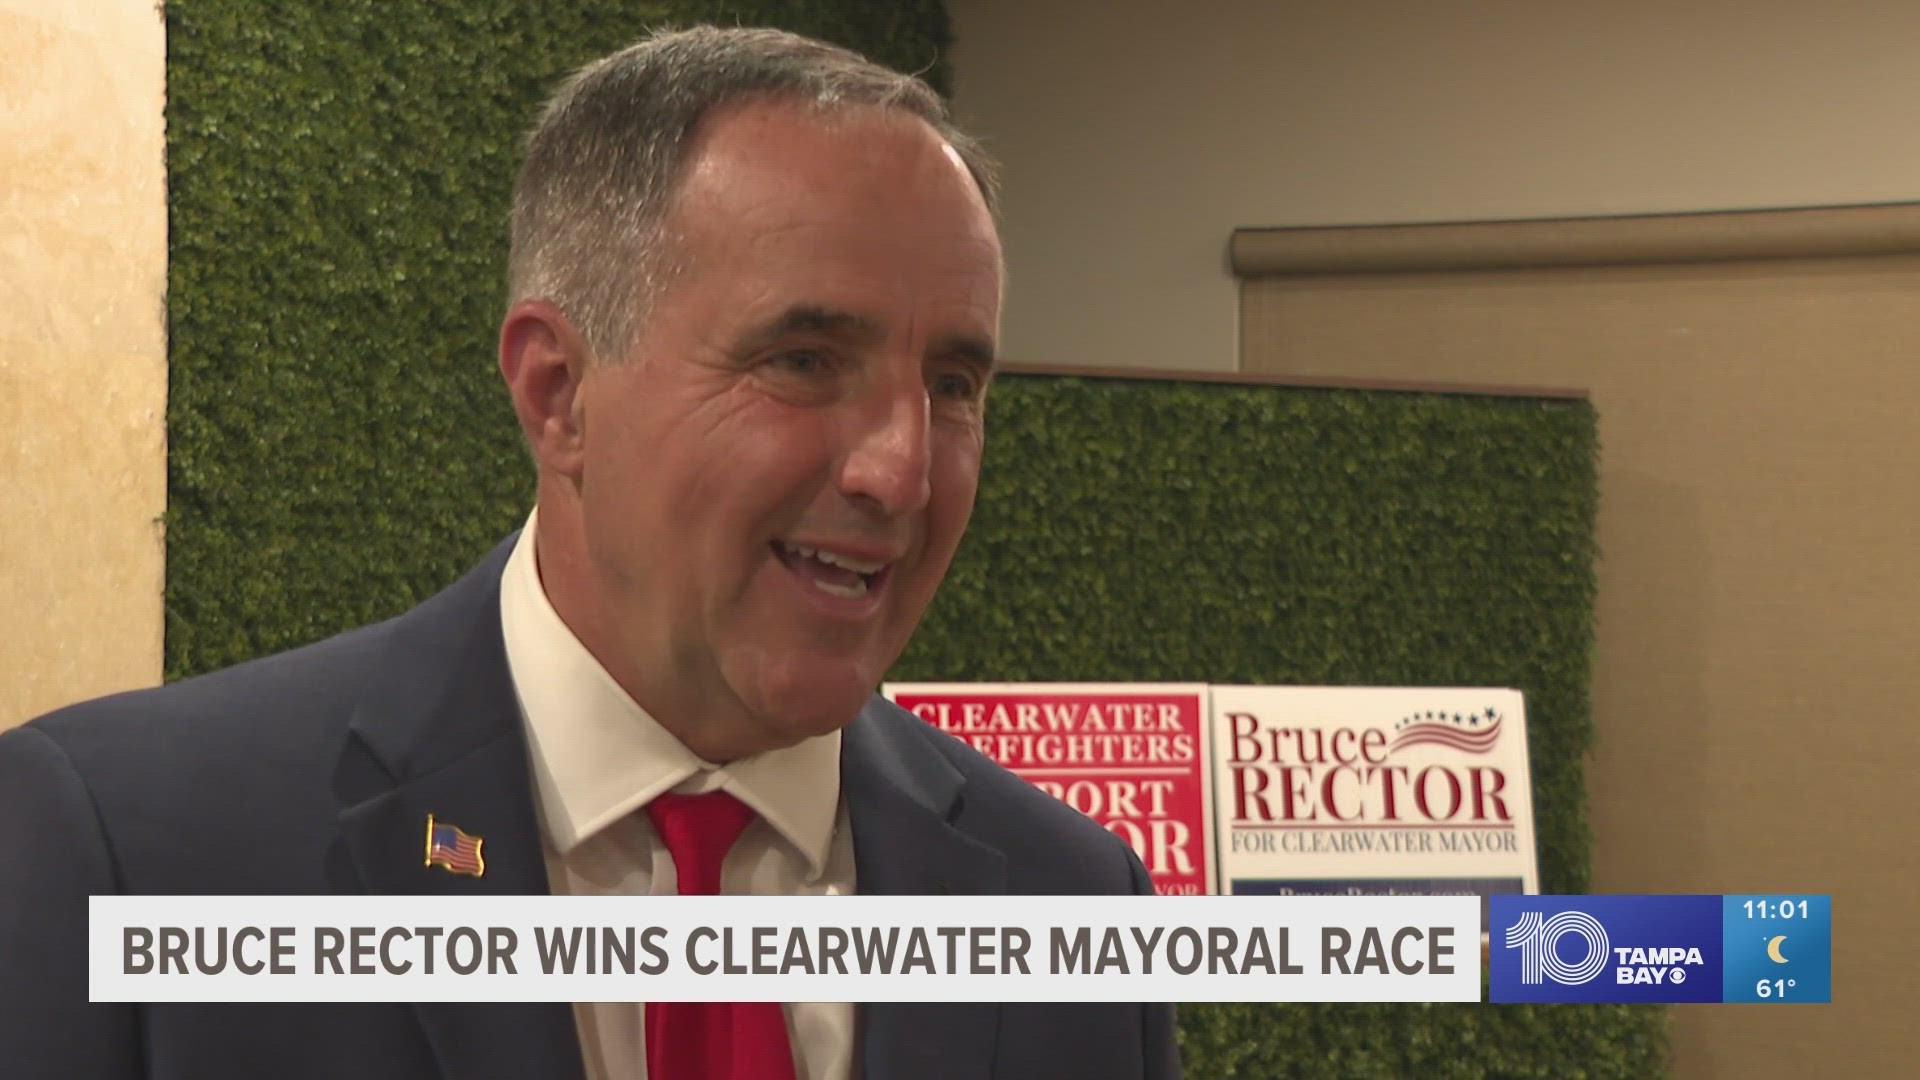 Clearwater voters also passed a change to the city charter to replace single winner-take-all elections with a runoff system.